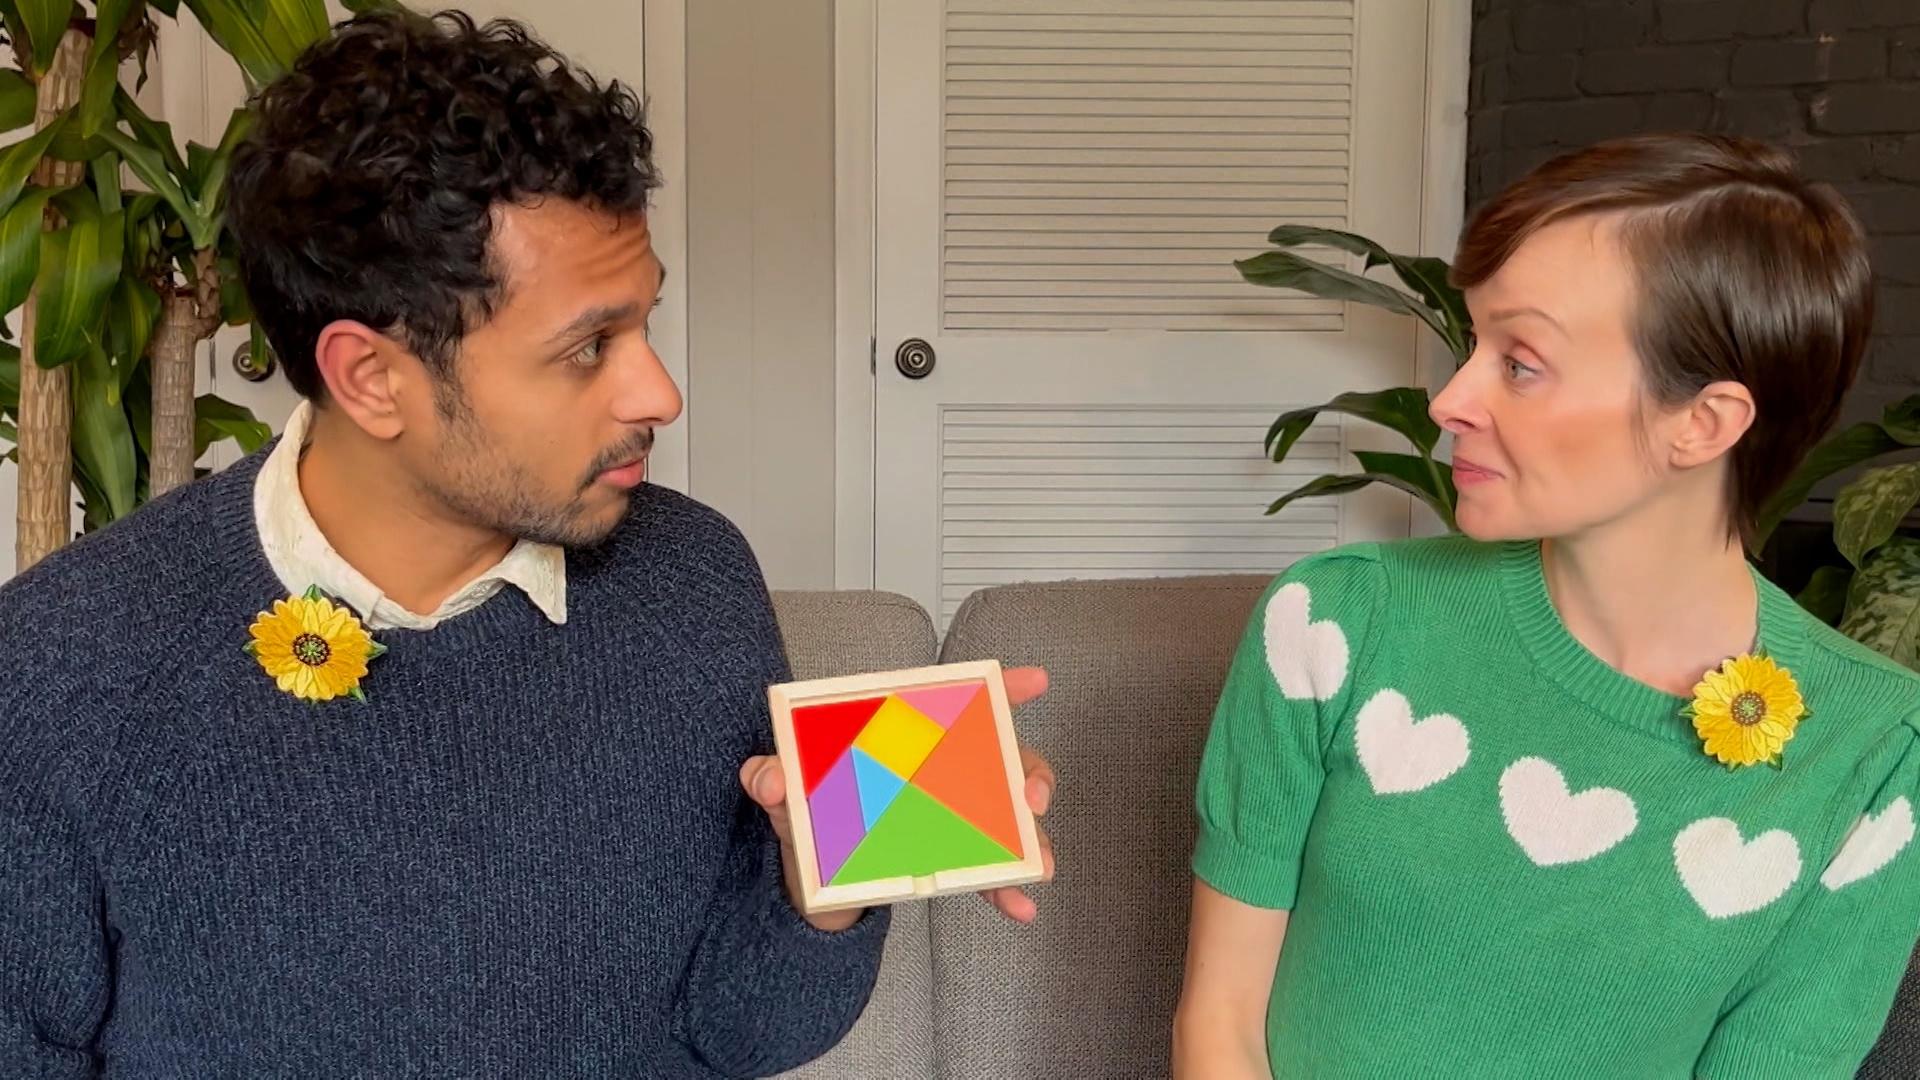 A man in a blue sweater and a woman in a green sweater sit on a tan couch, facing each other, and holding a tangram set between them.